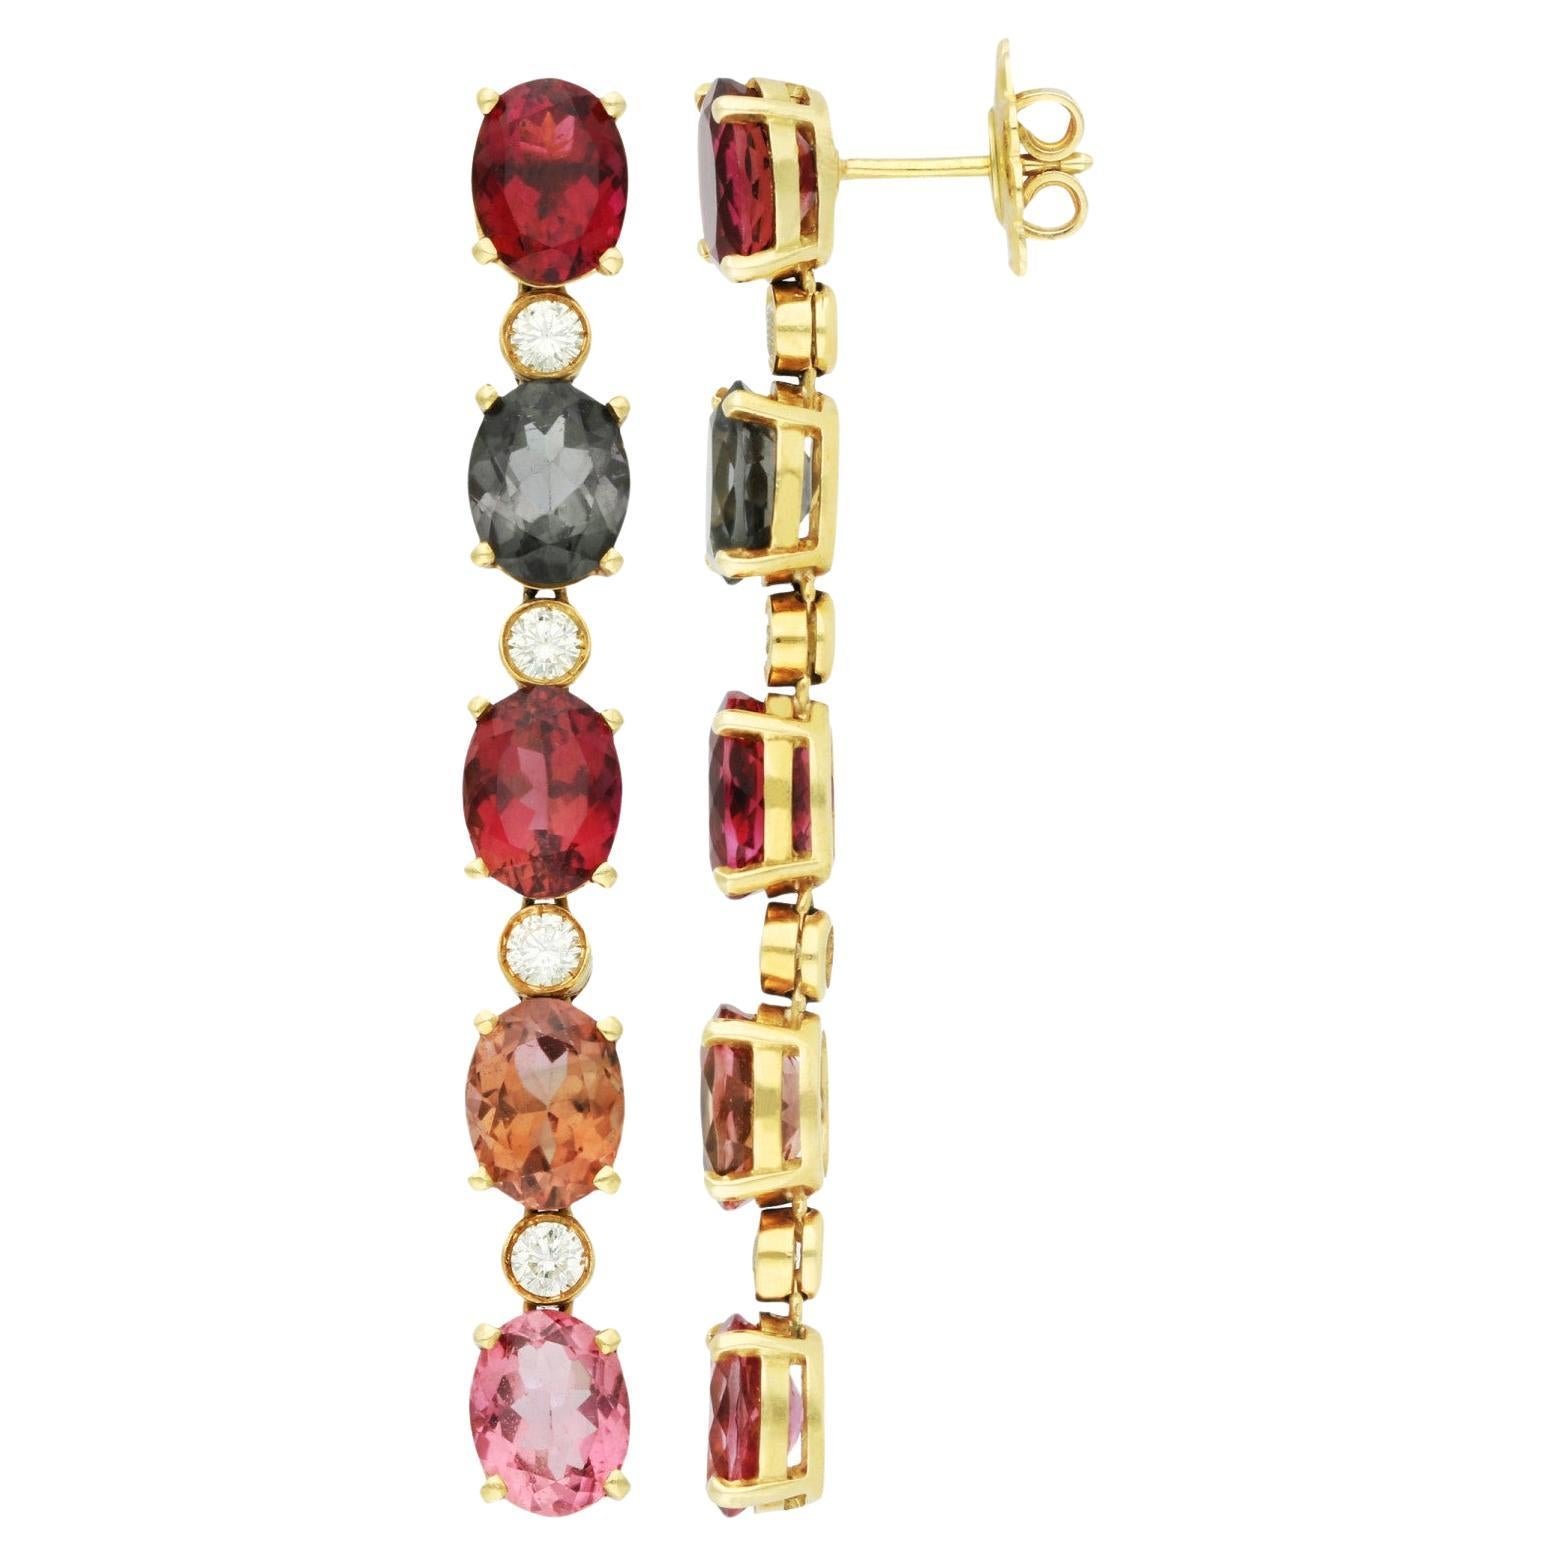 18ct Yellow Gold 18ct Tourmaline & 0.80ct Diamond Drop Earrings

Elevate your elegance with our Pair of Pre-Loved 18ct Yellow Gold Tourmaline & Diamond Drop Earrings, a mesmerising cascade of vibrant colours and scintillating diamonds. Each earring